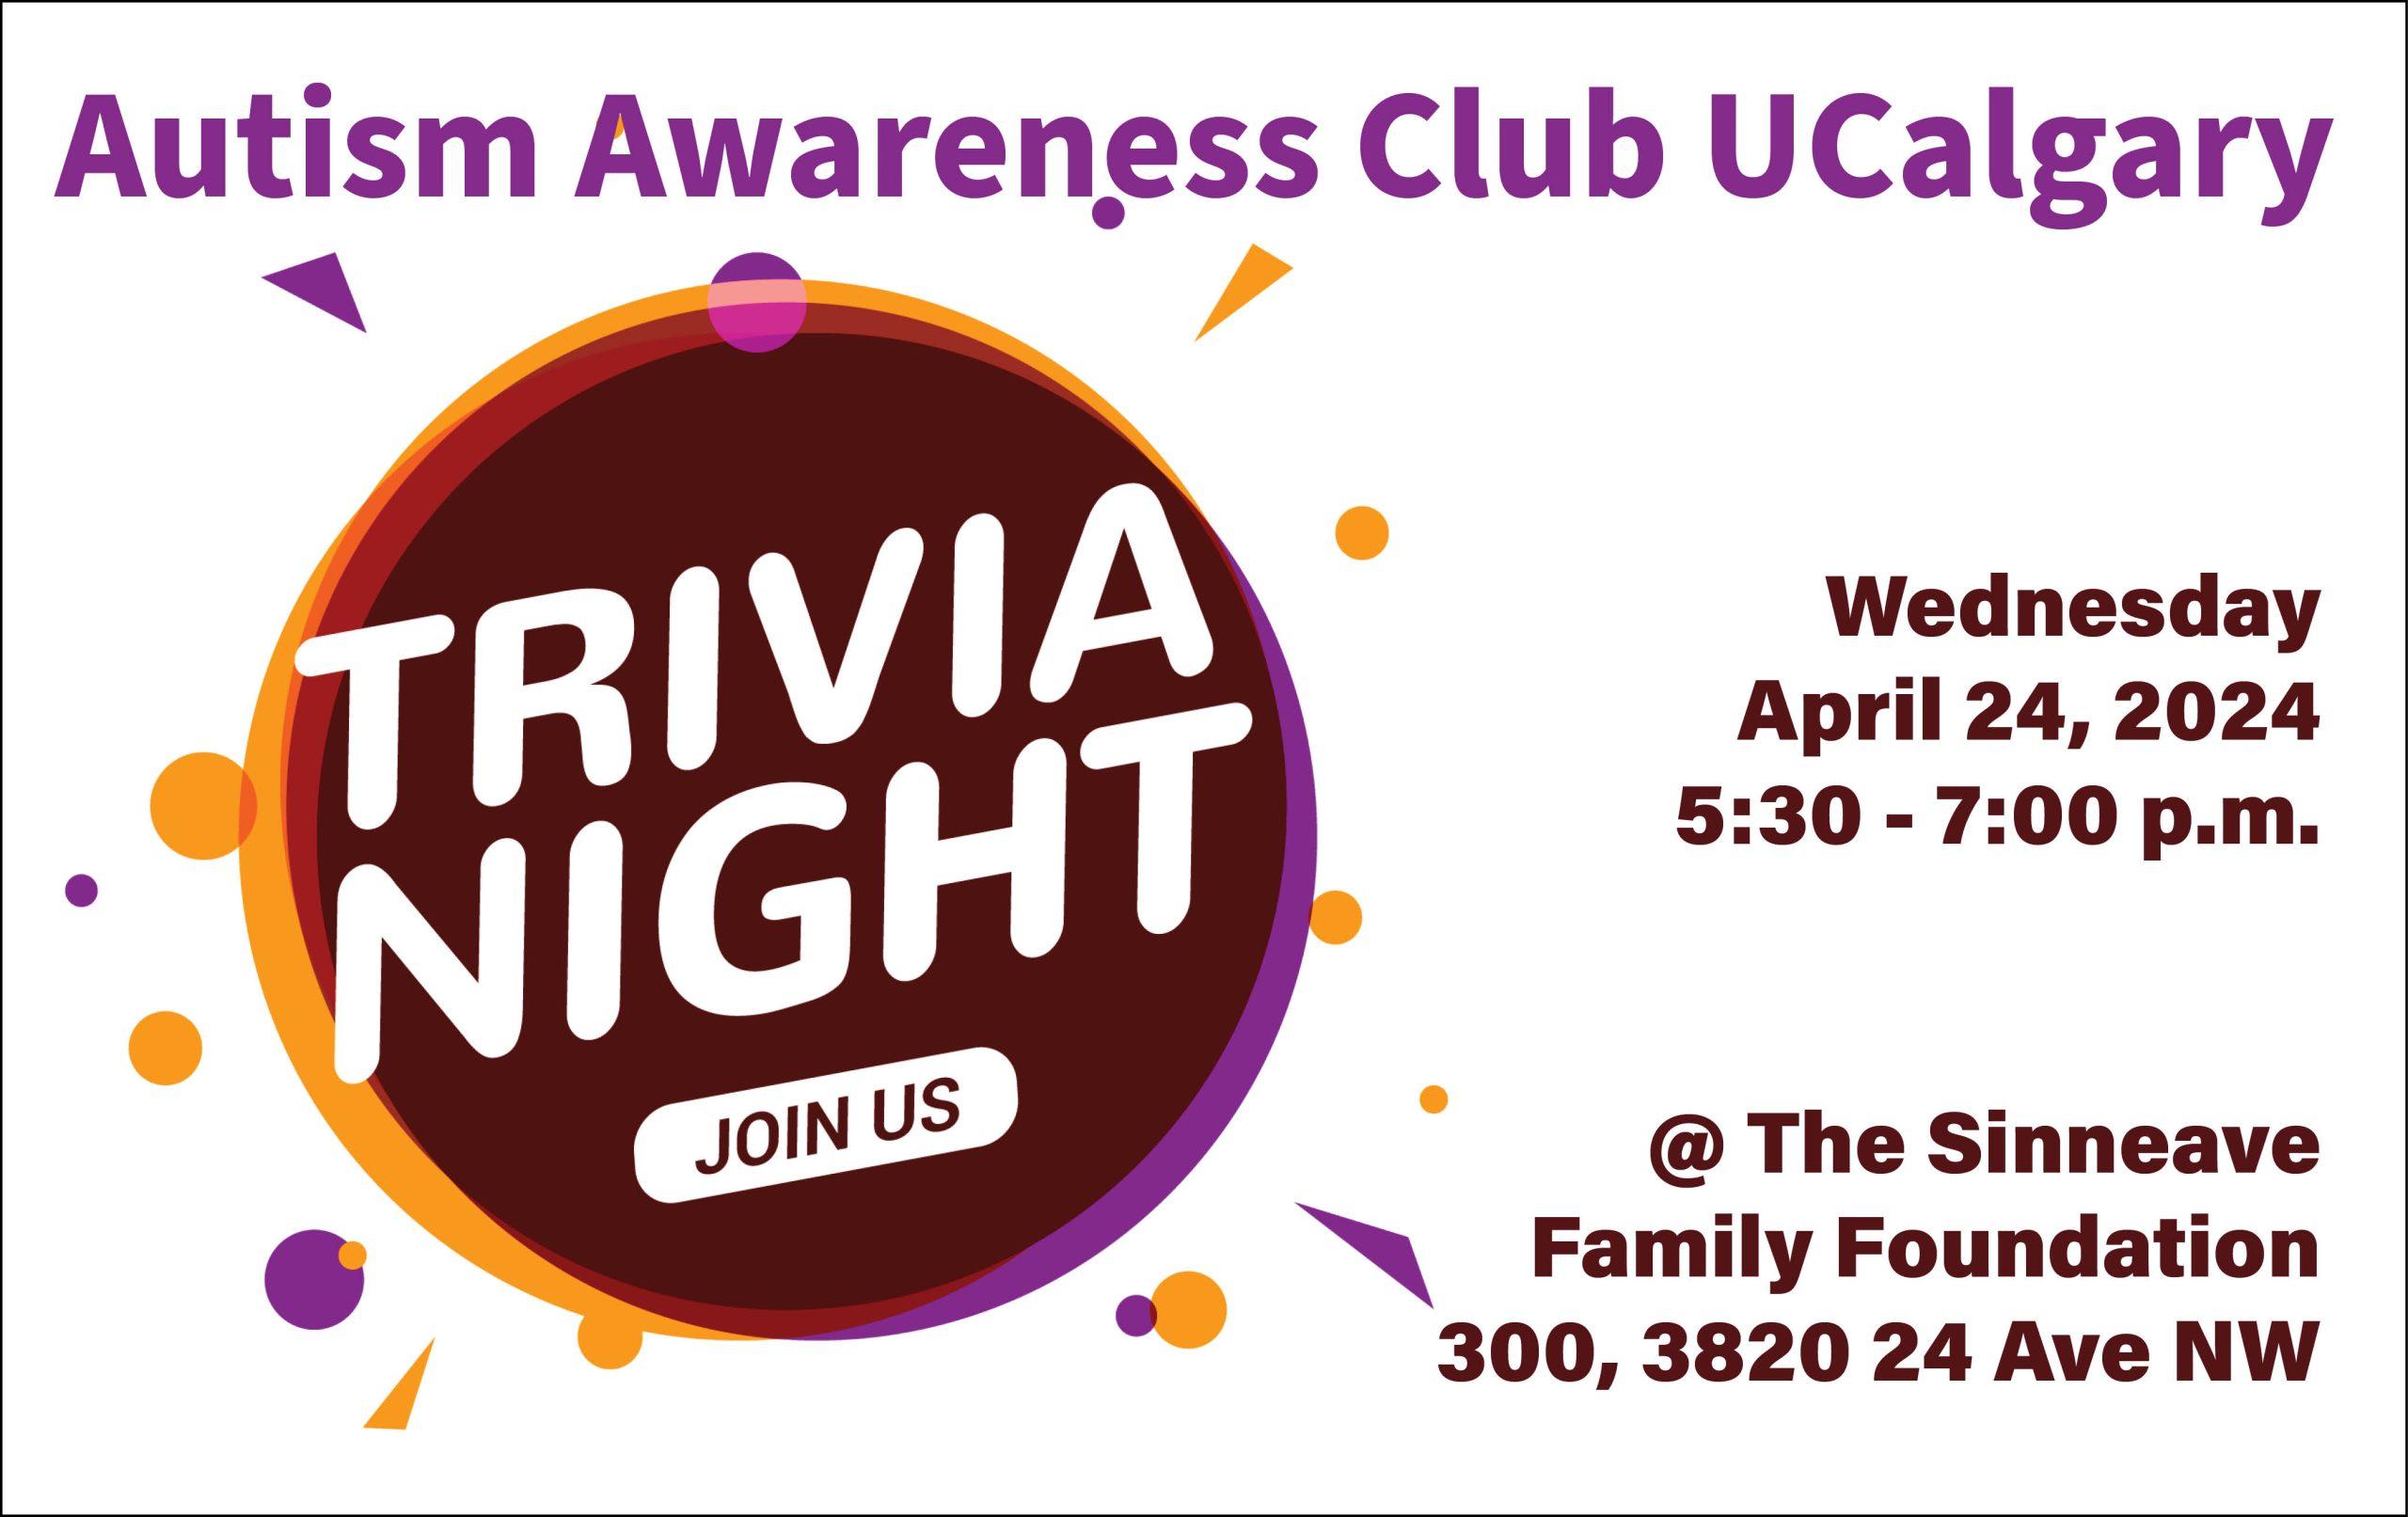 On a white background, the text at the top reads, "Autism Awareness Club UCalgary". The image on the left says Trivia Night Join Us! The text on the right reads, "Wednesday, April 24 from 5:30 to 7 pm at The Sinneave Family Foundation."